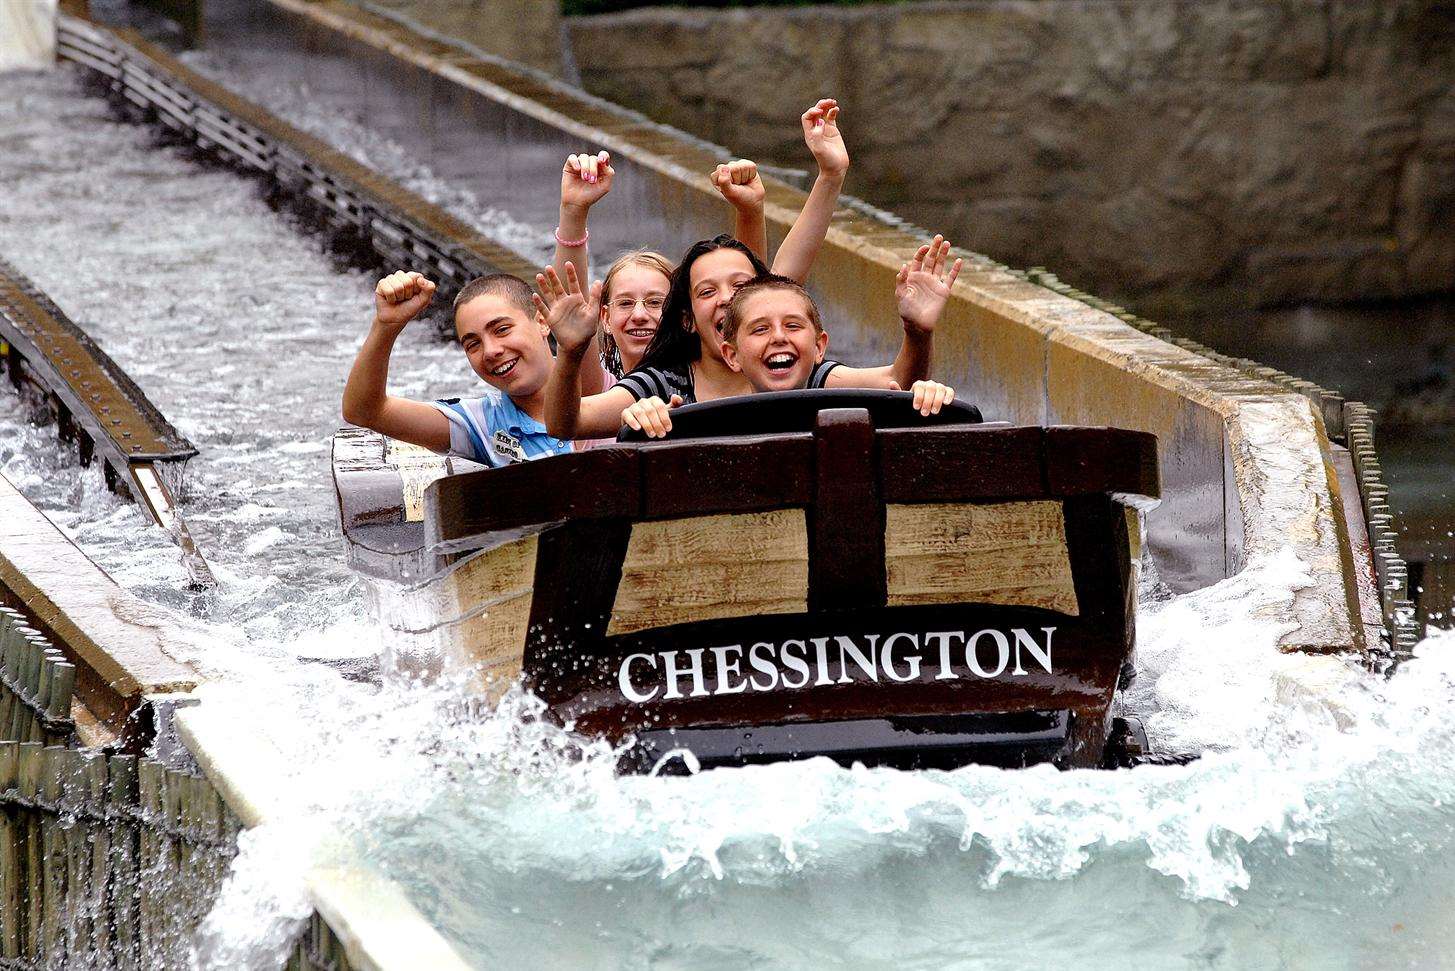 A ride at Chessington World of Adventures